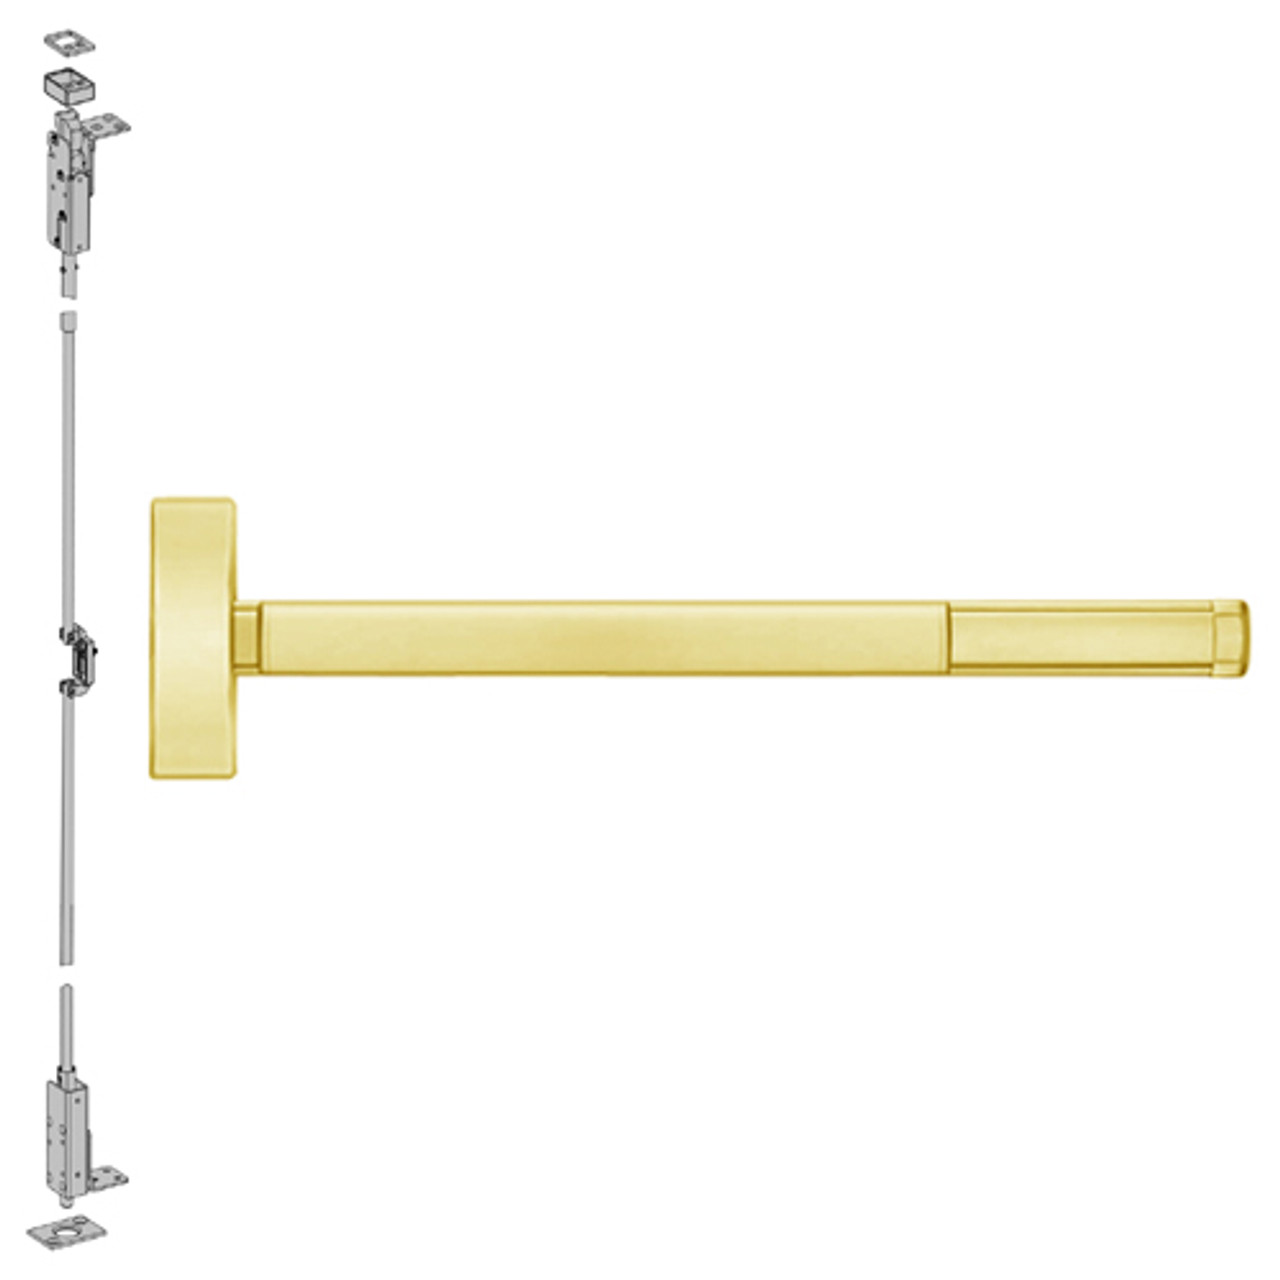 FL2703-605-36 PHI 2700 Series Fire Rated Wood Door Concealed Vertical Exit Device Prepped for Key Retracts Latchbolt in Bright Brass Finish